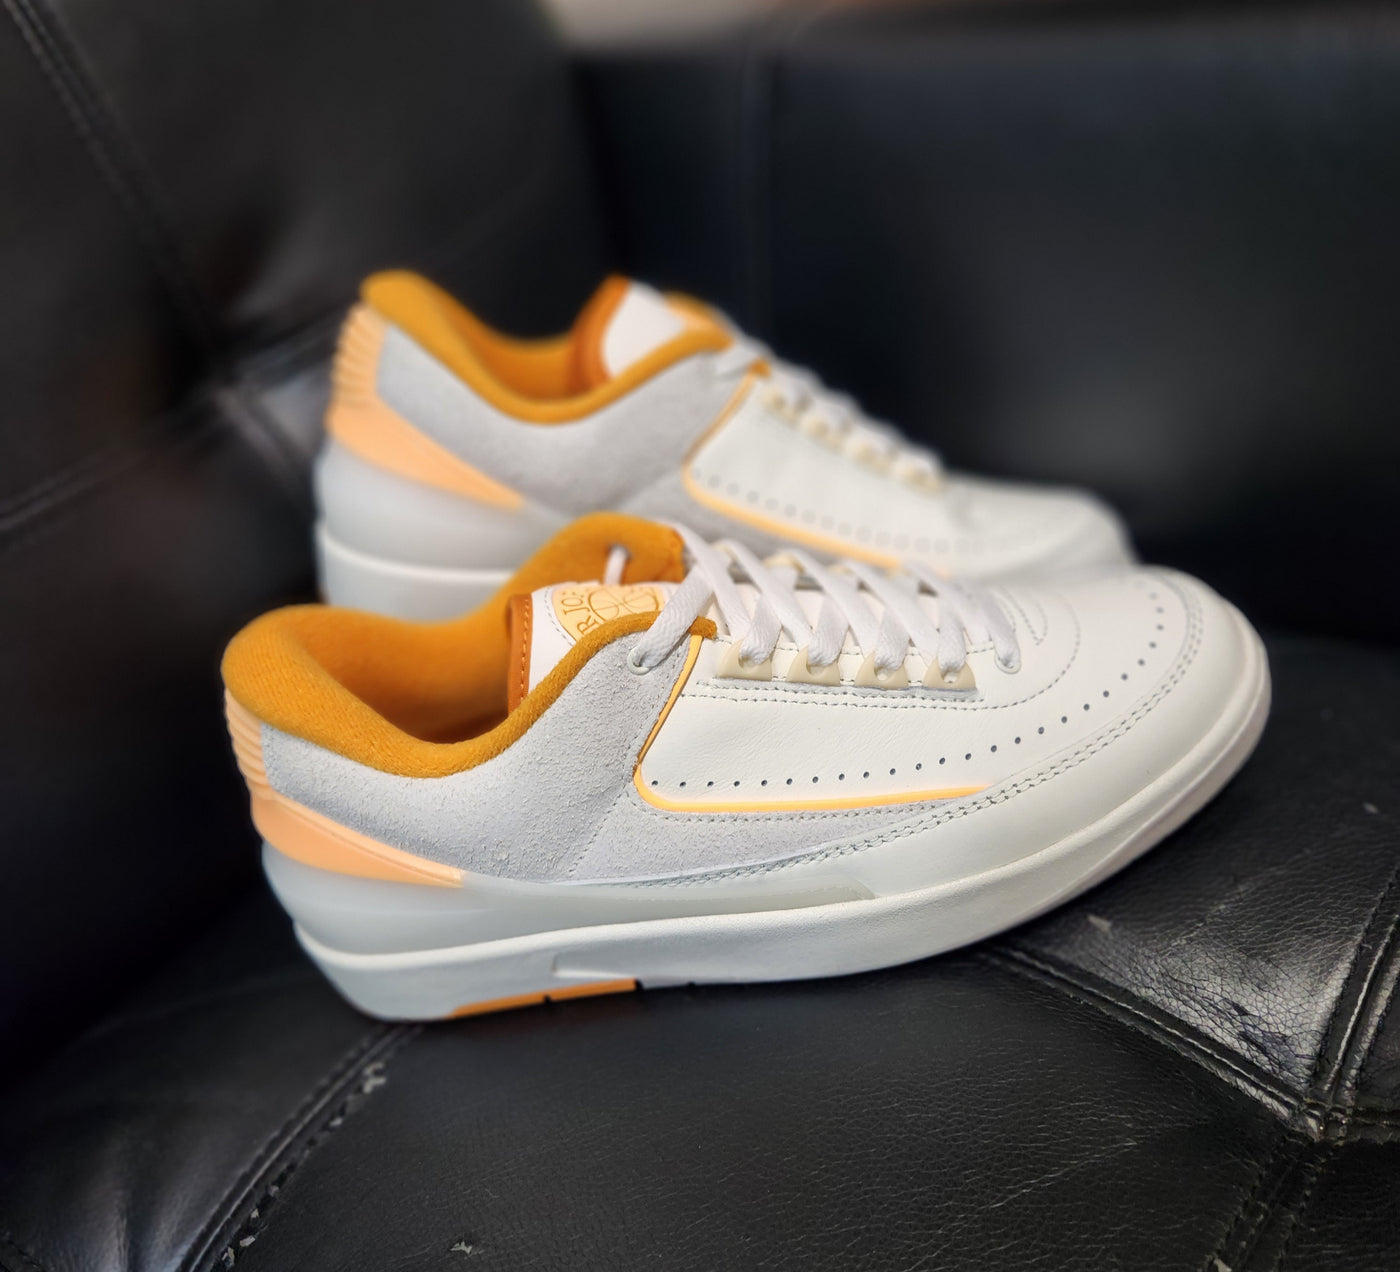 Air Jordan 2 Retro Low Craft Melon Tint off-white sneakers with orange accents on tongue, heel, and outsole, SKU DV8759-600